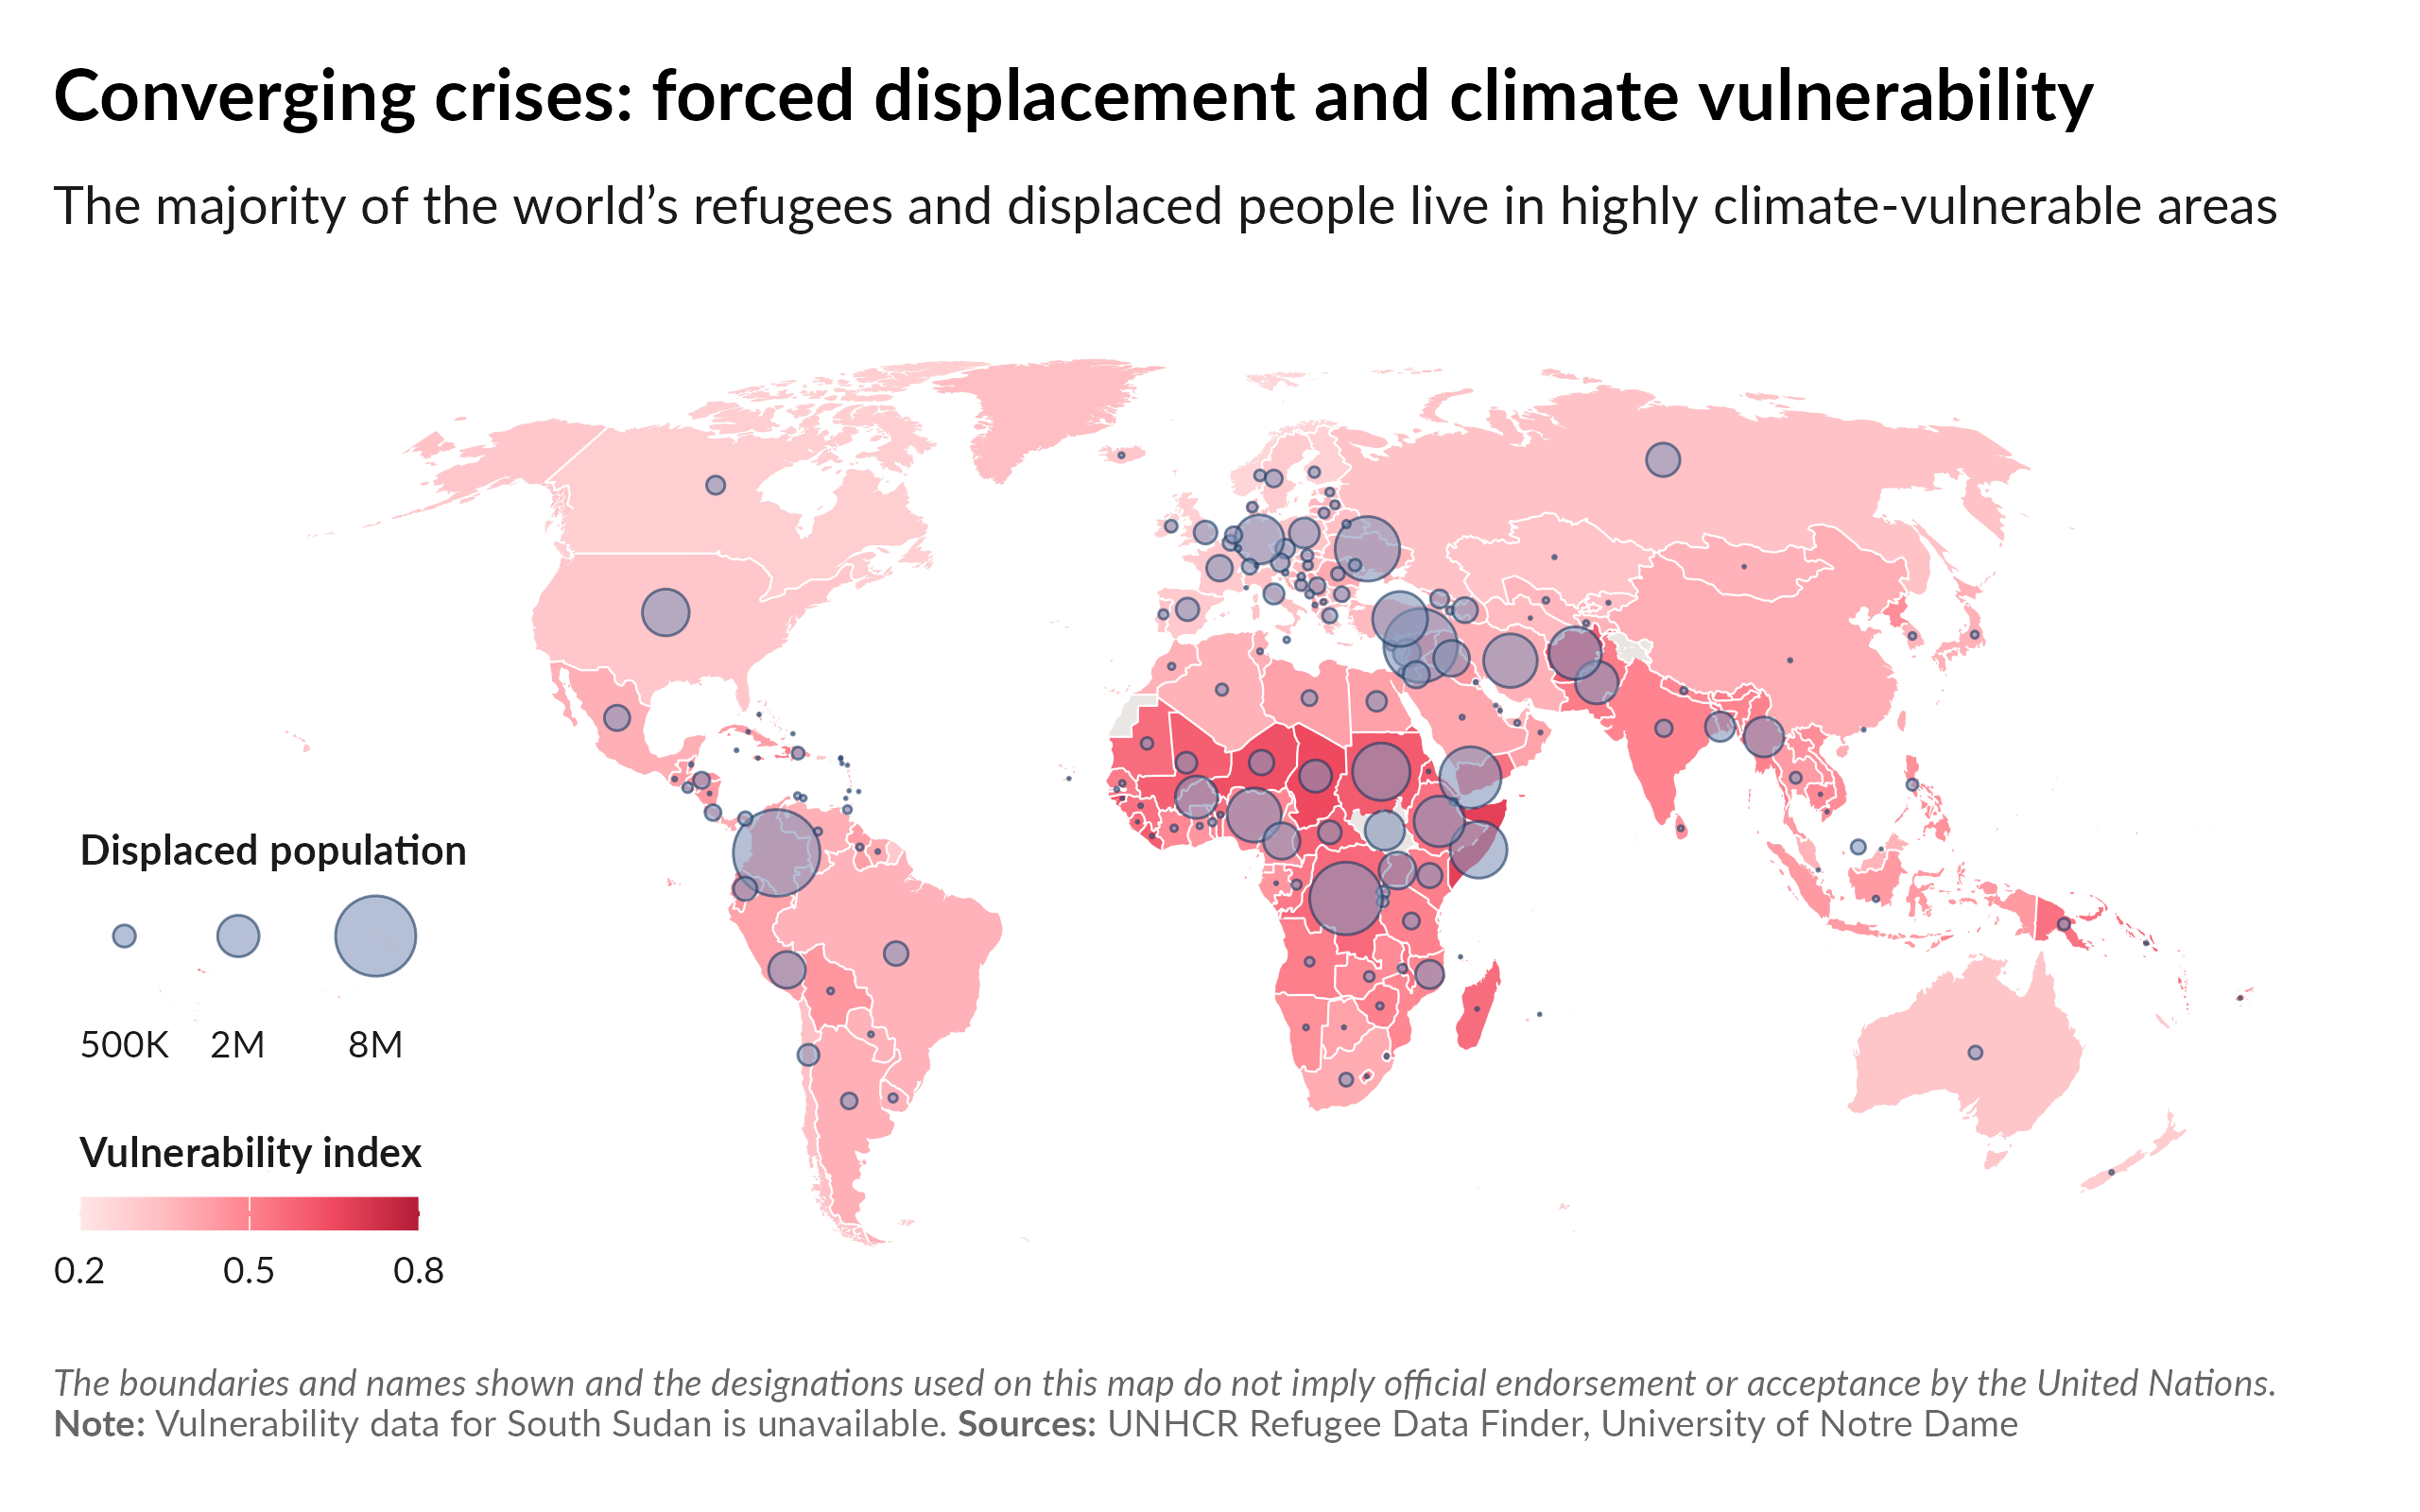 A map of the world showing areas of climate vulnerability and displaced population density